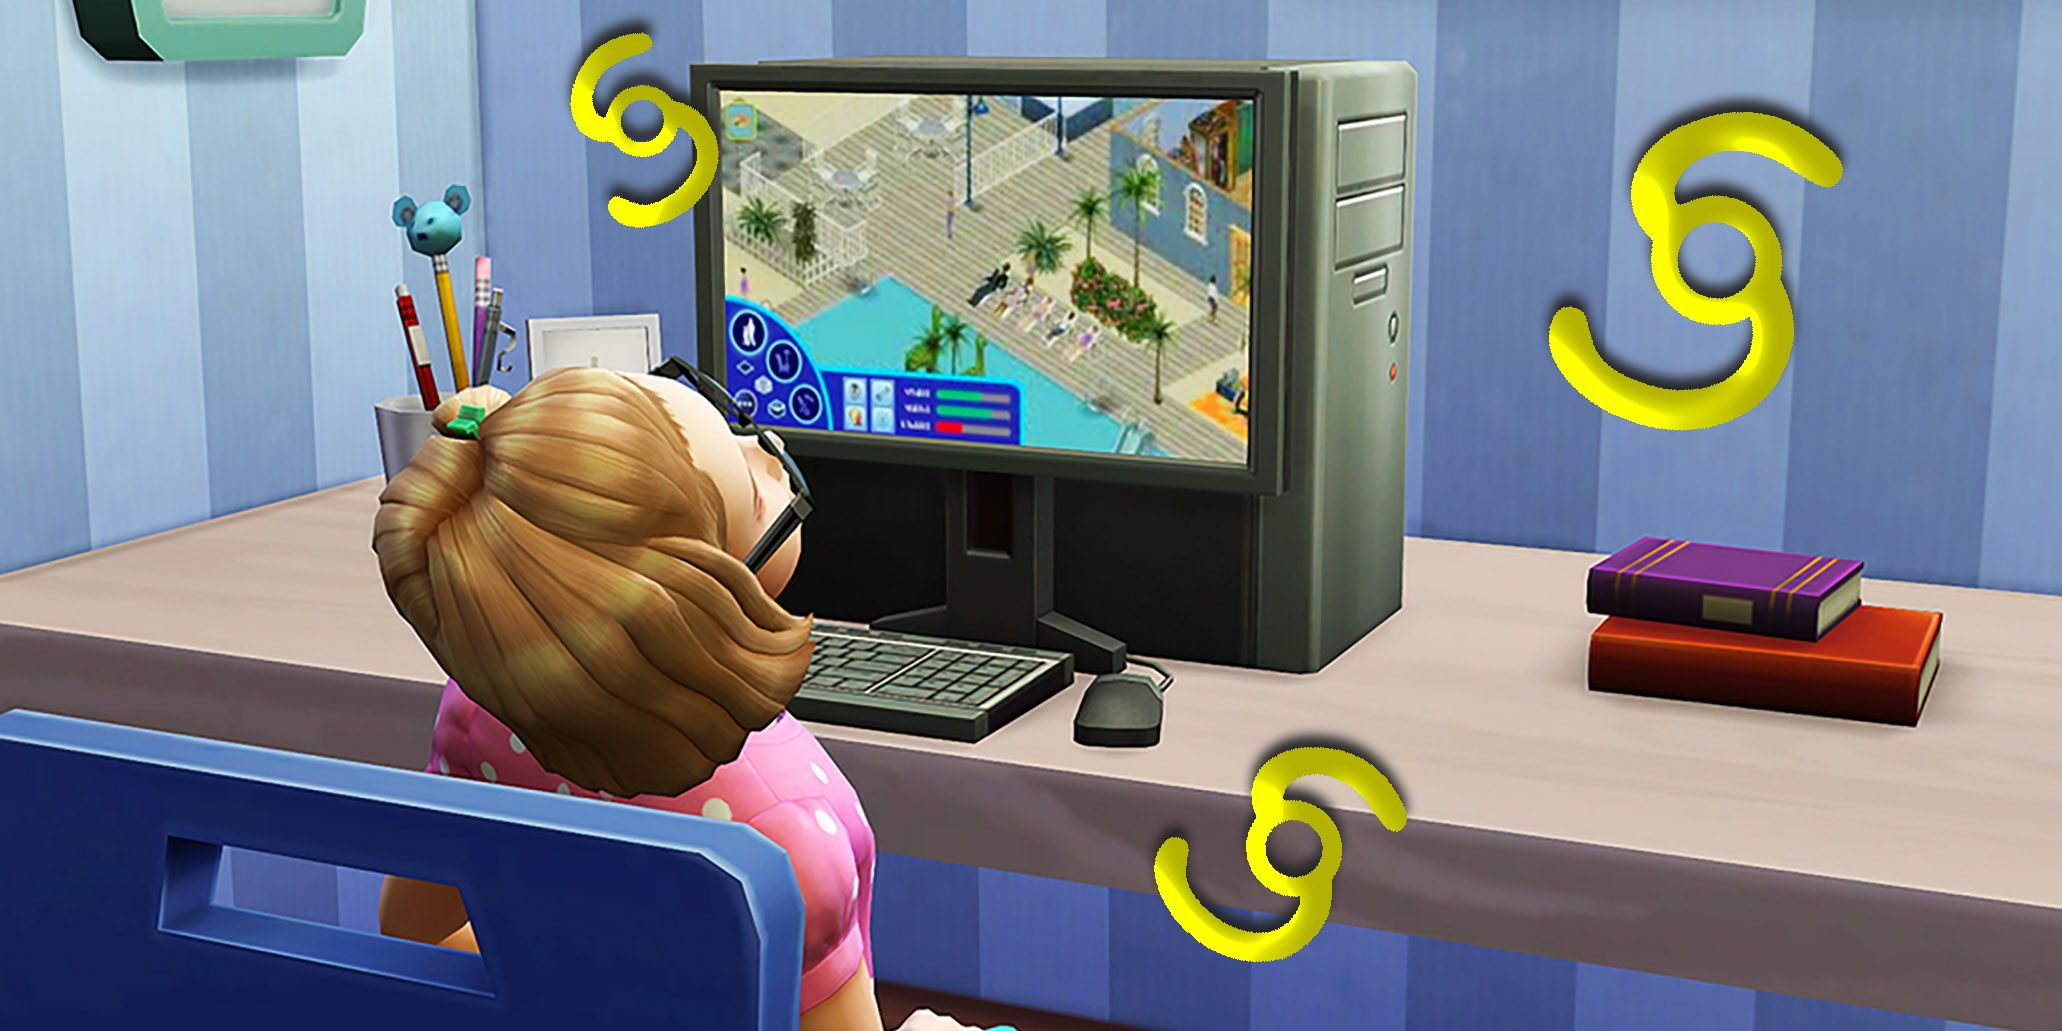 Playing The Sims in The Sims 4